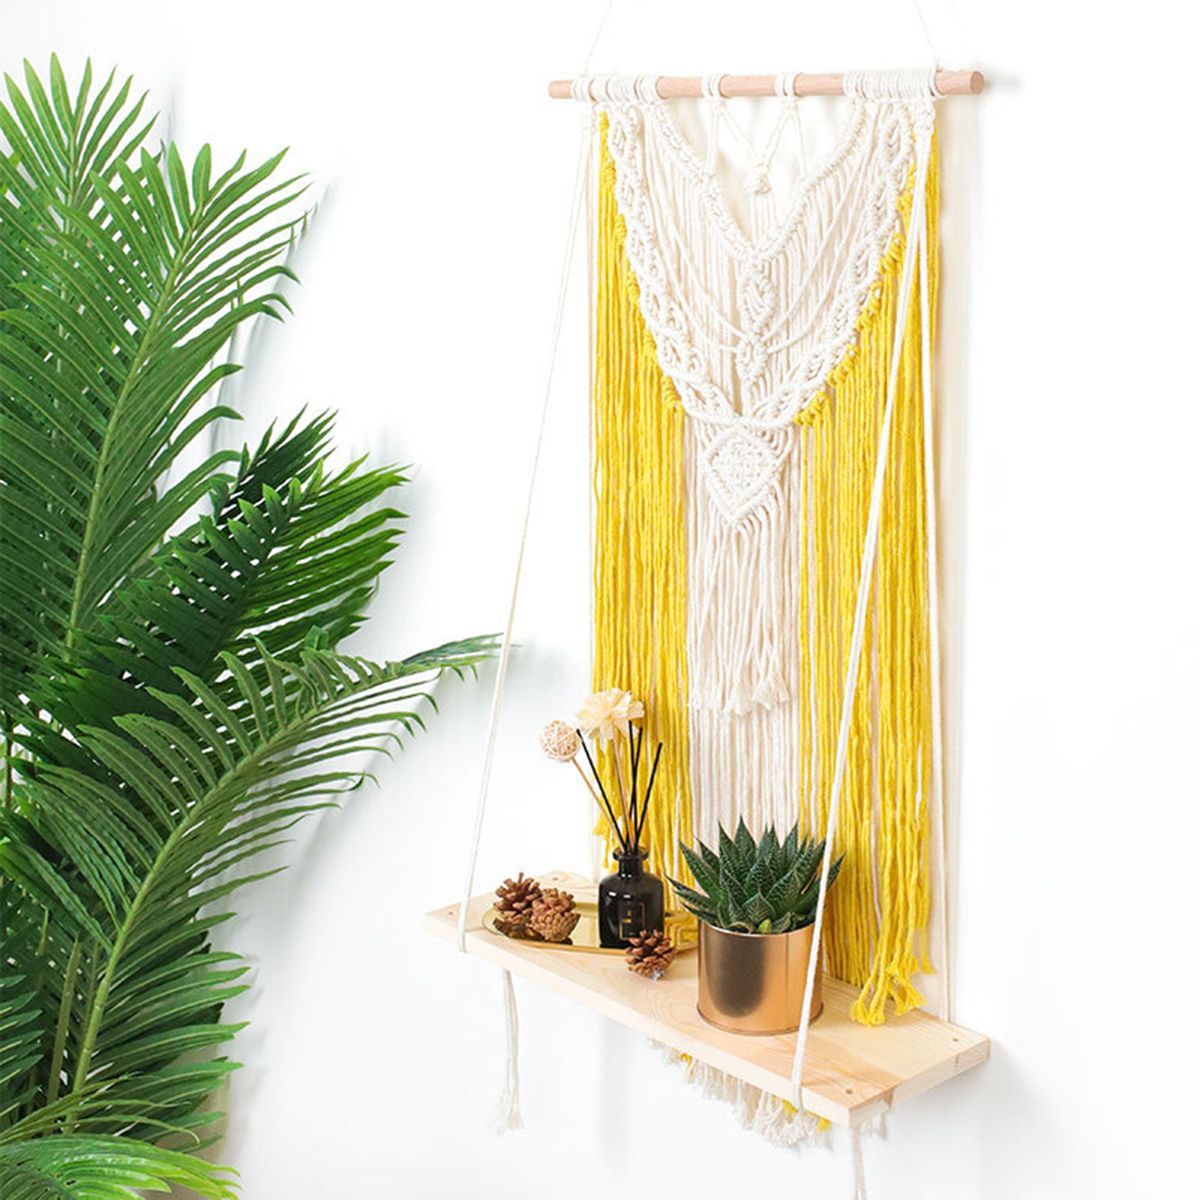 Wall-mounted-Lace-Woven-Macrame-Plant-Hanger-Wall-Cotton-Rope-Tapestry-Shelf-1727270